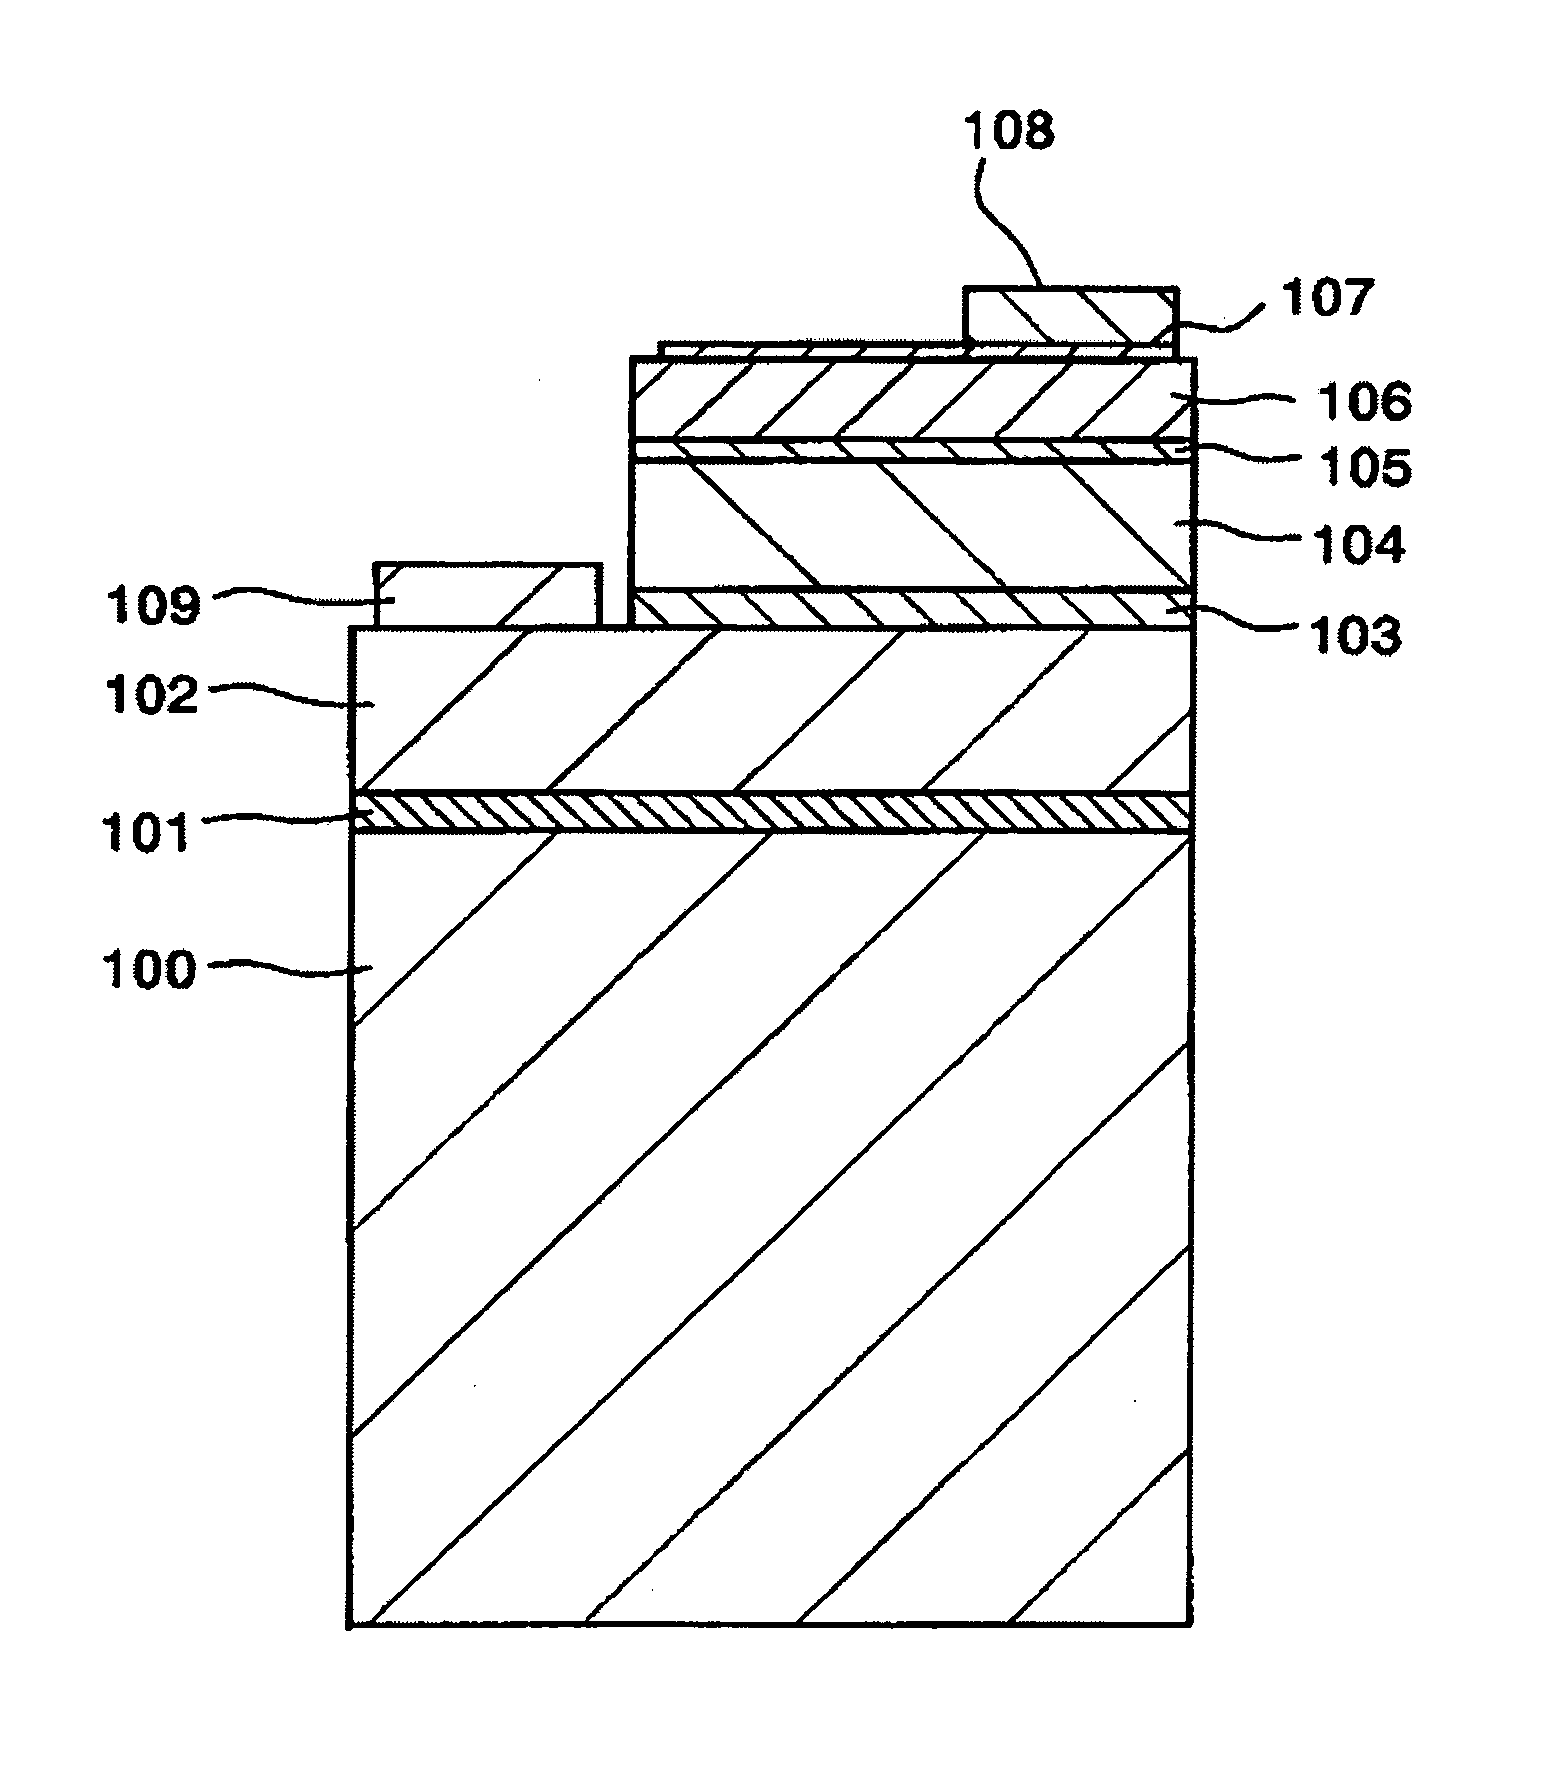 Compound Semiconductor Light-Emitting Device